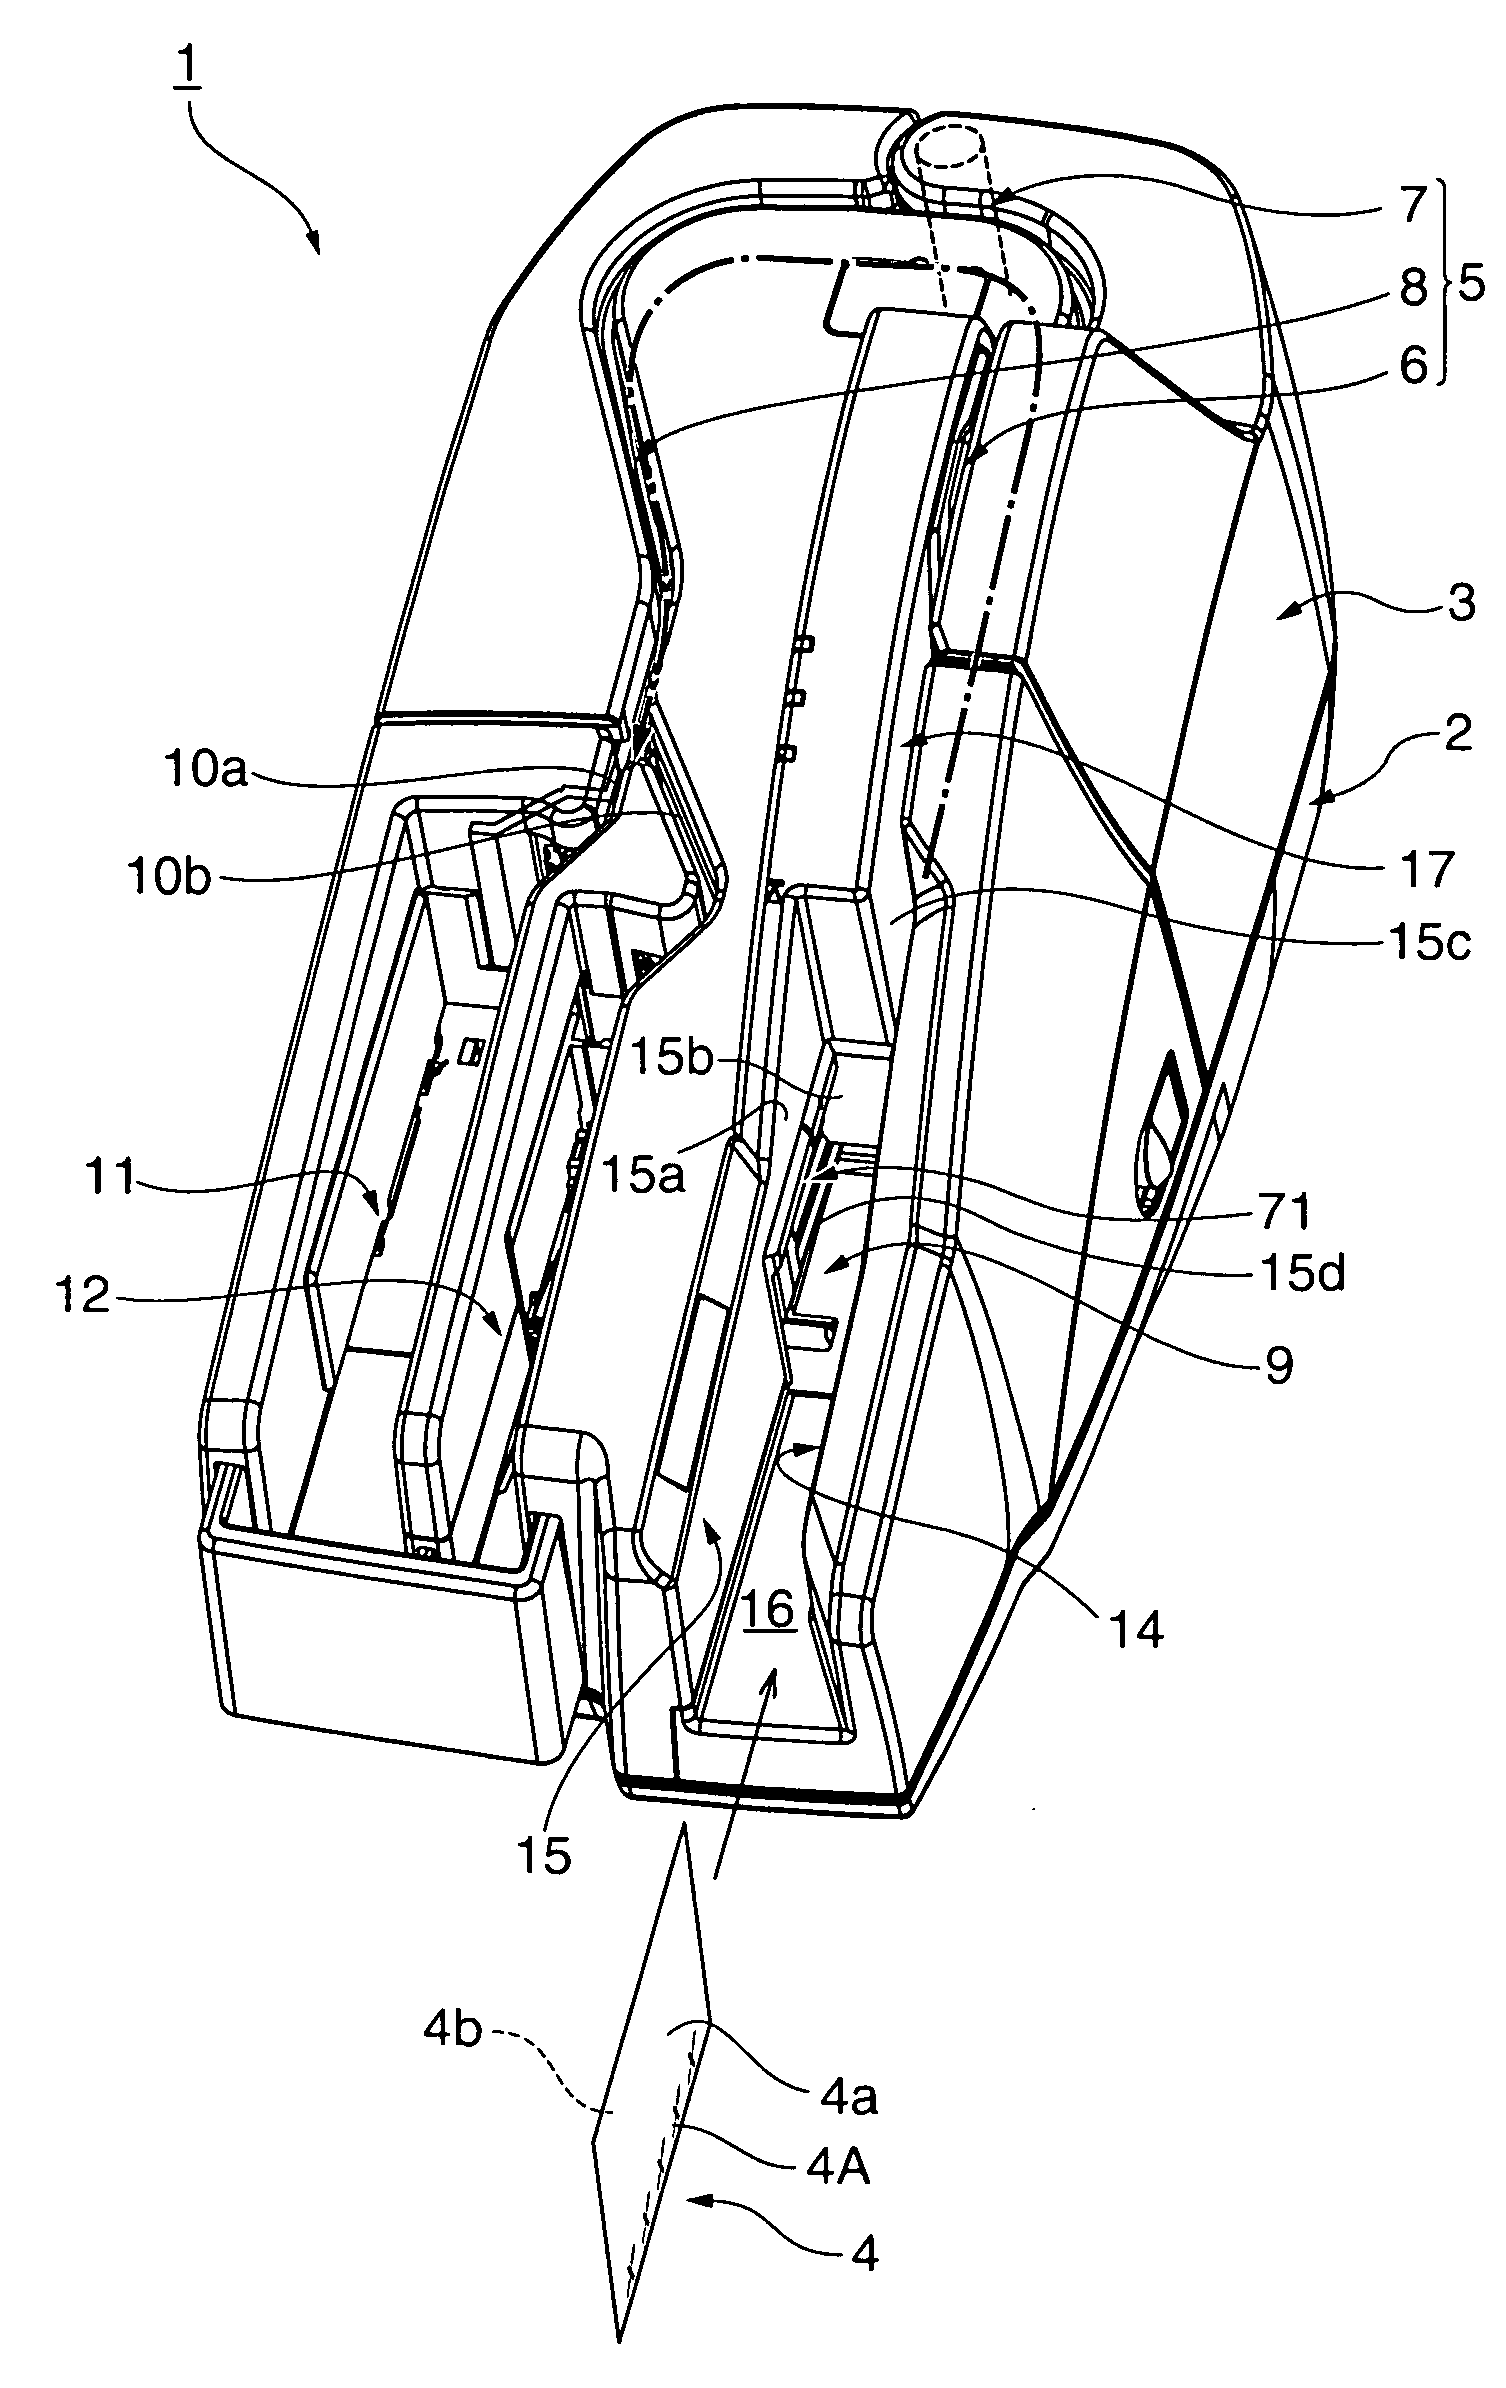 Media separating and feeding device and media processing device